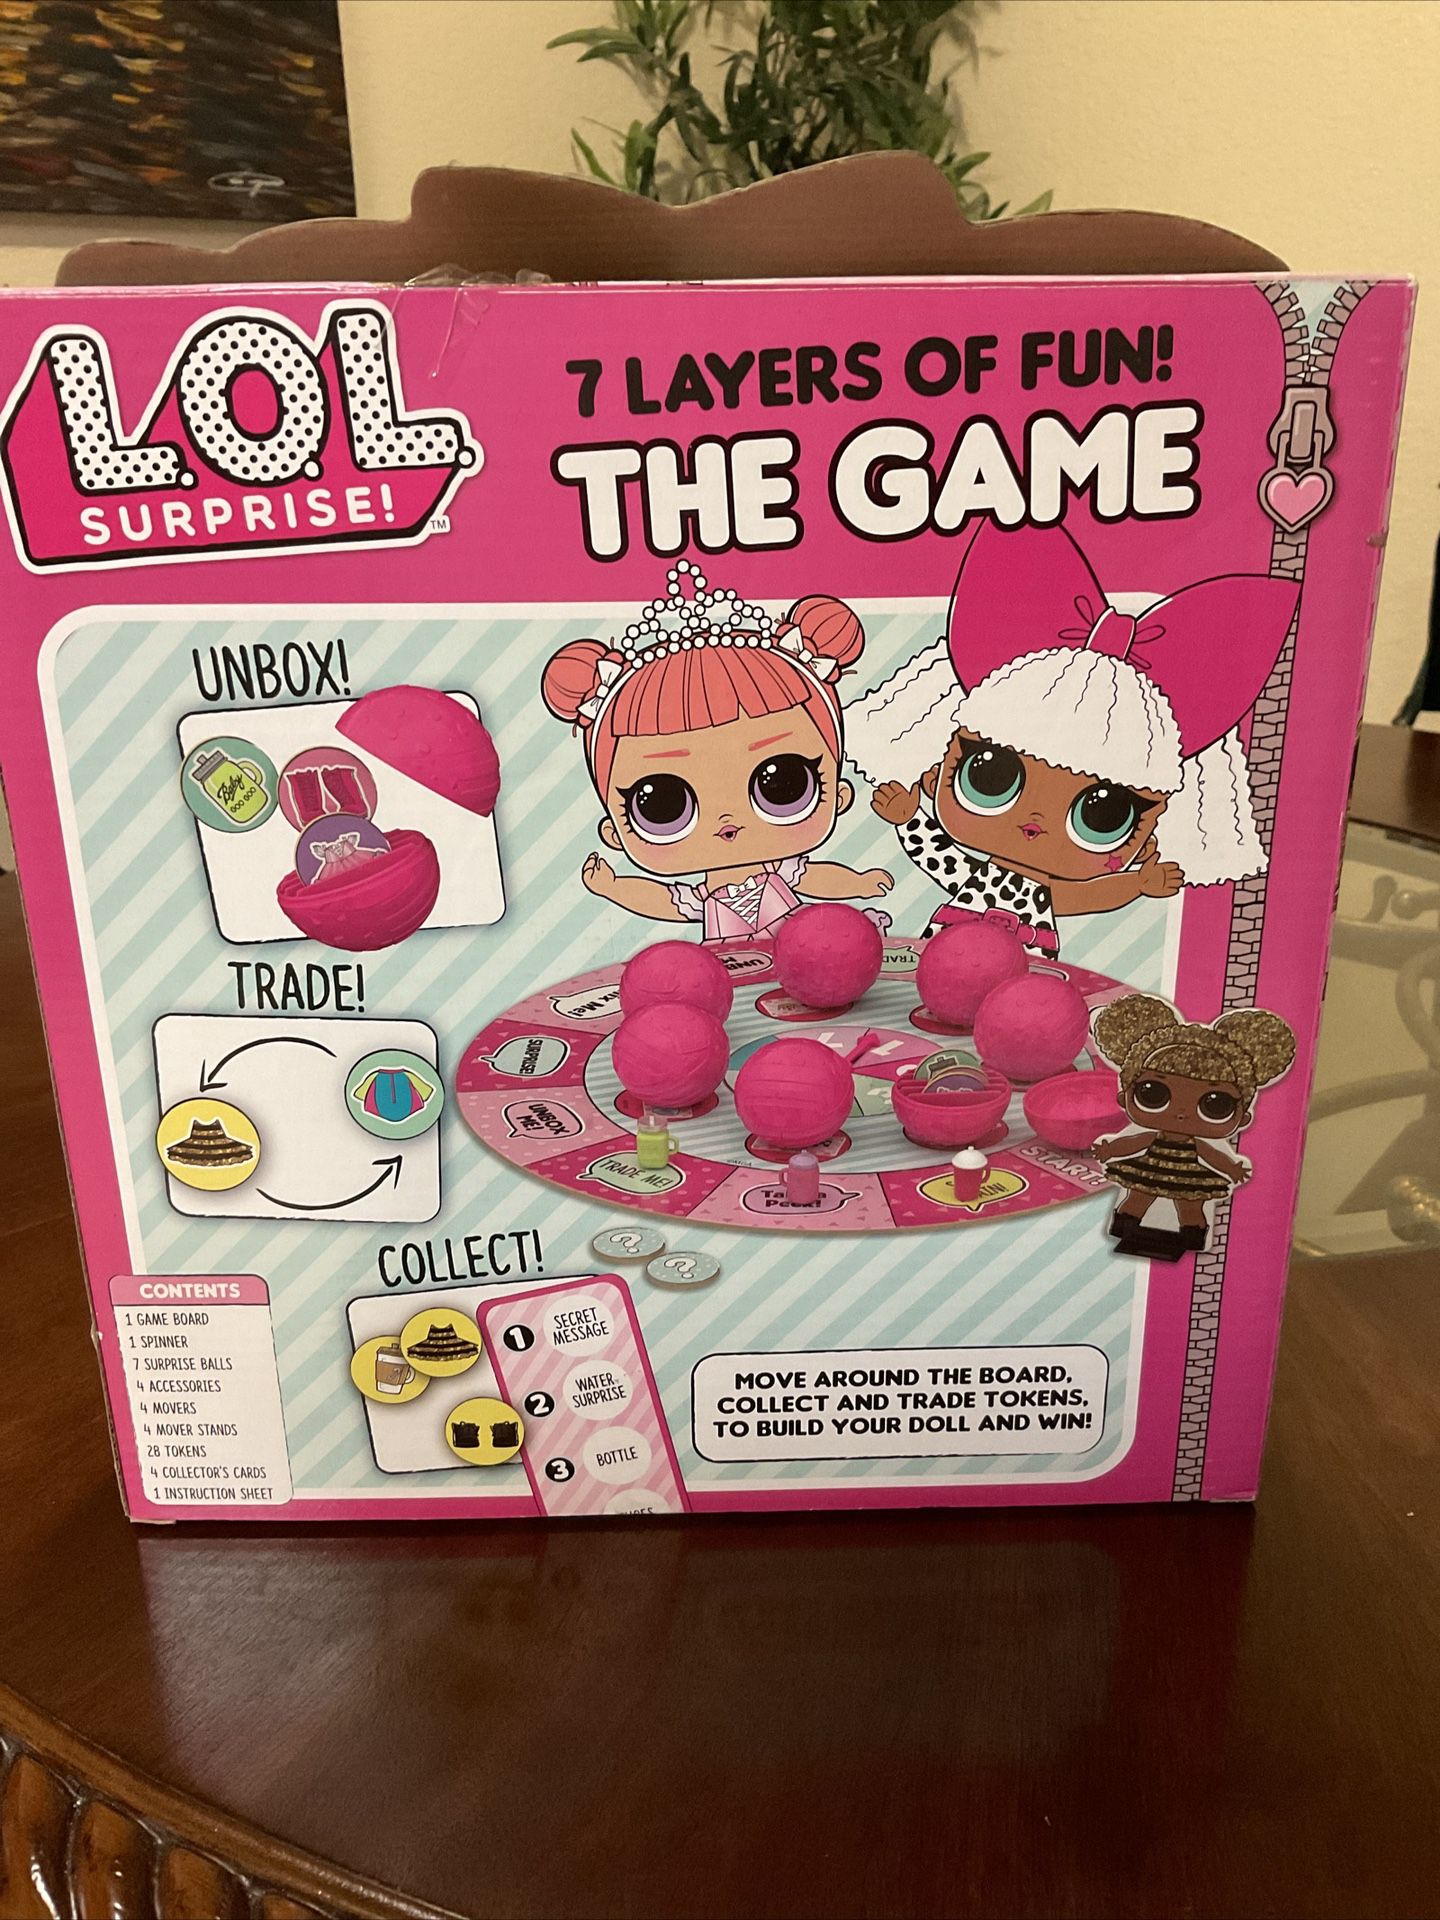 L.O.L. Surprise The Game 7 Layers of Fun LOL with Exclusive Accessory NIB